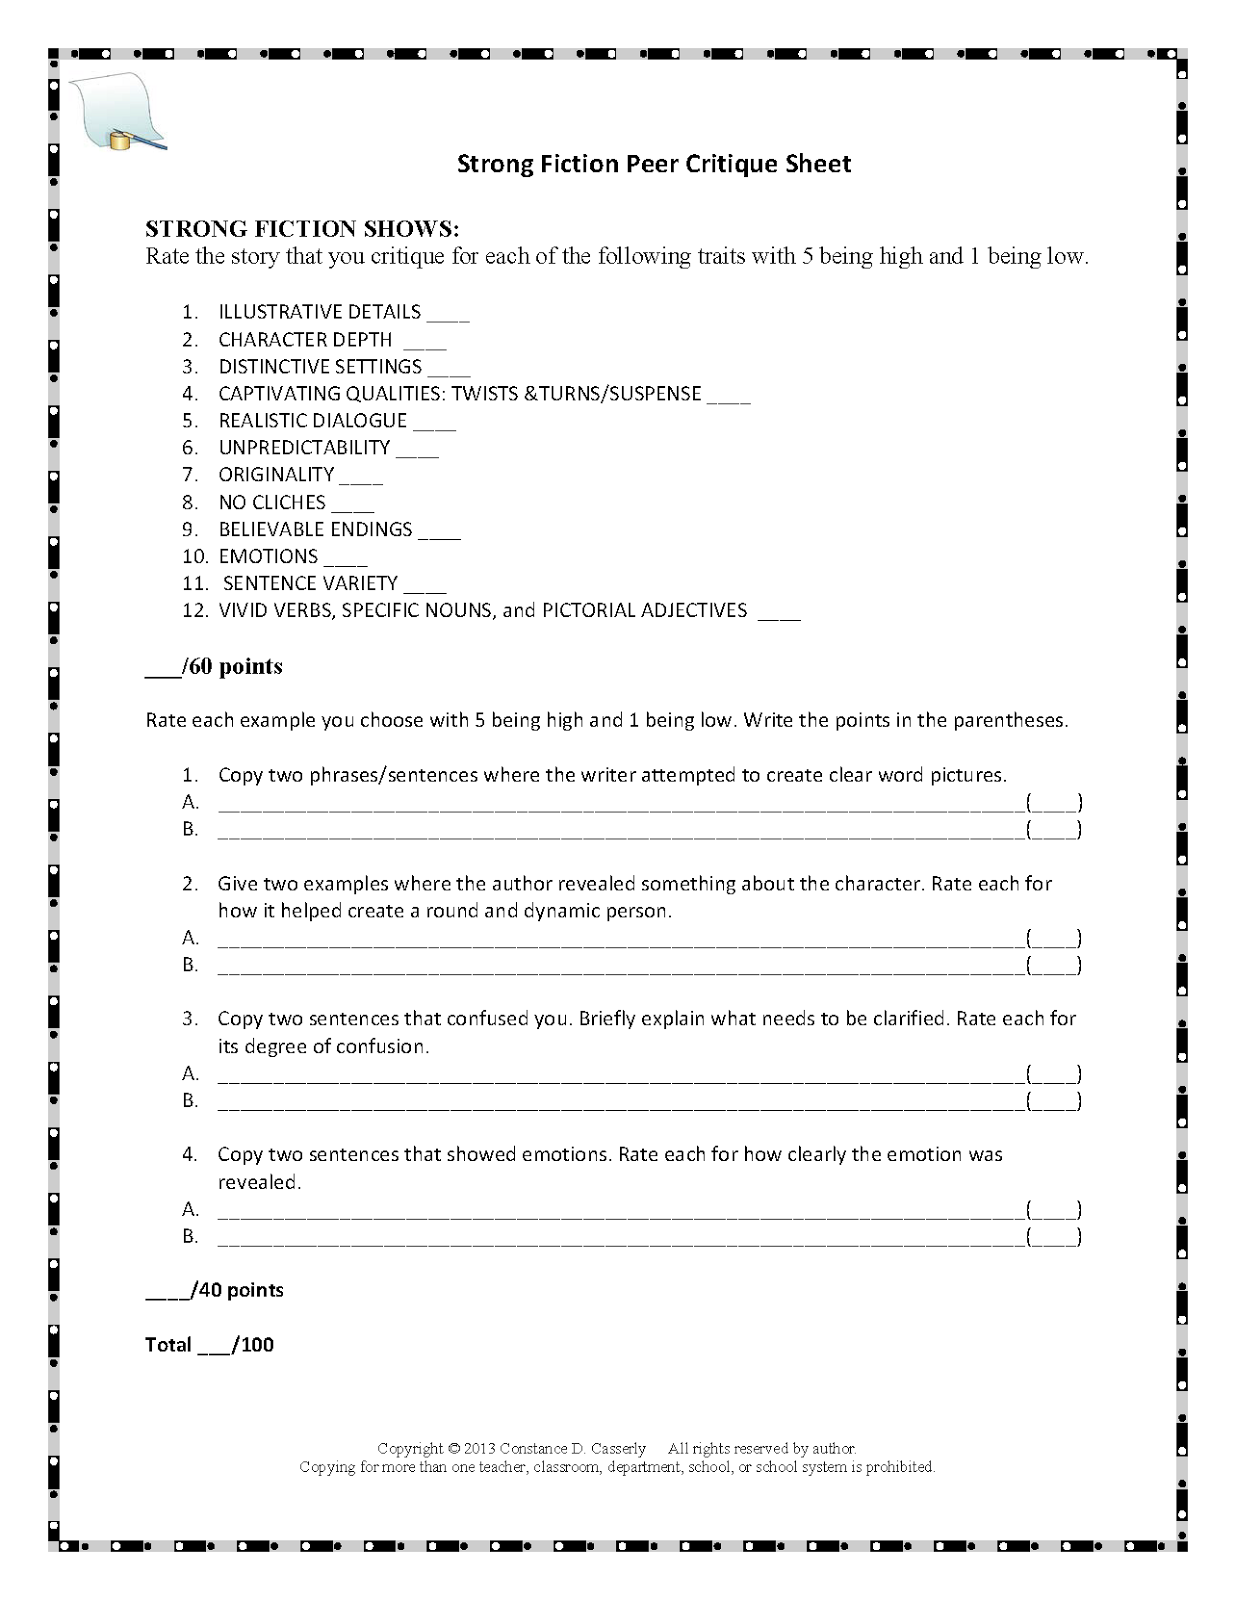 writing activities middle school pdf